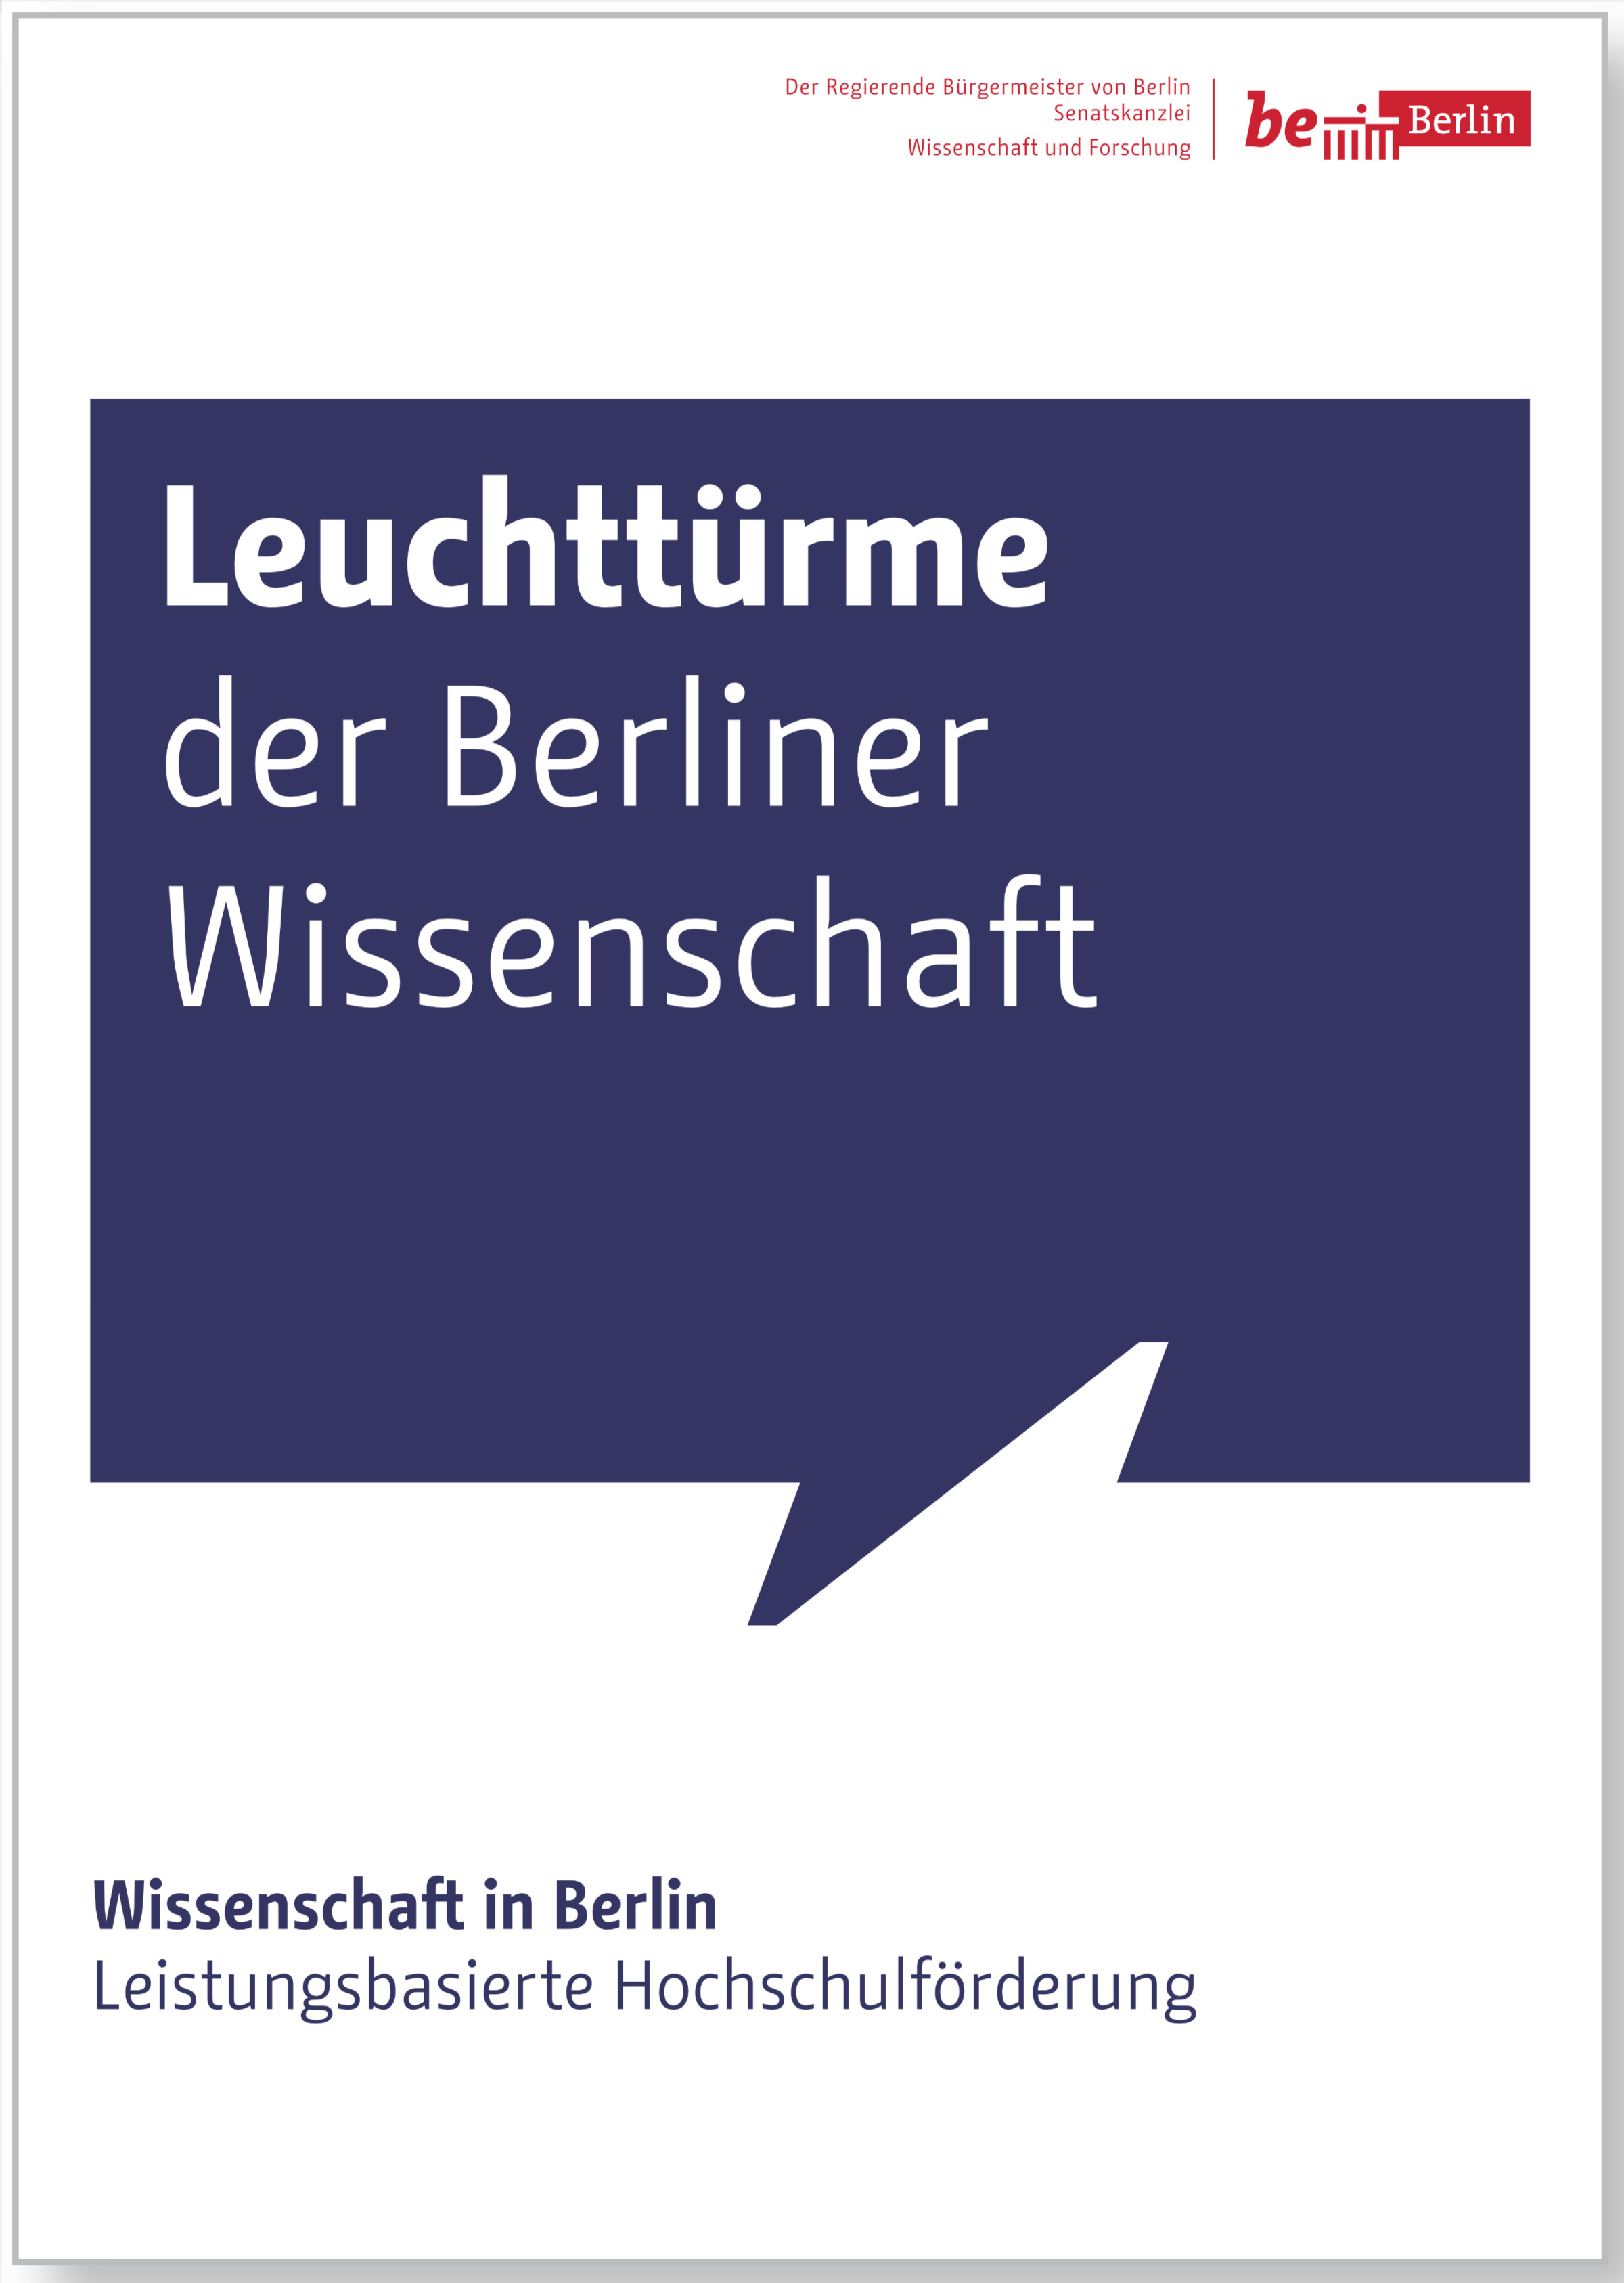 Change in use as Berlin’s corporate typeface - Cover brochure